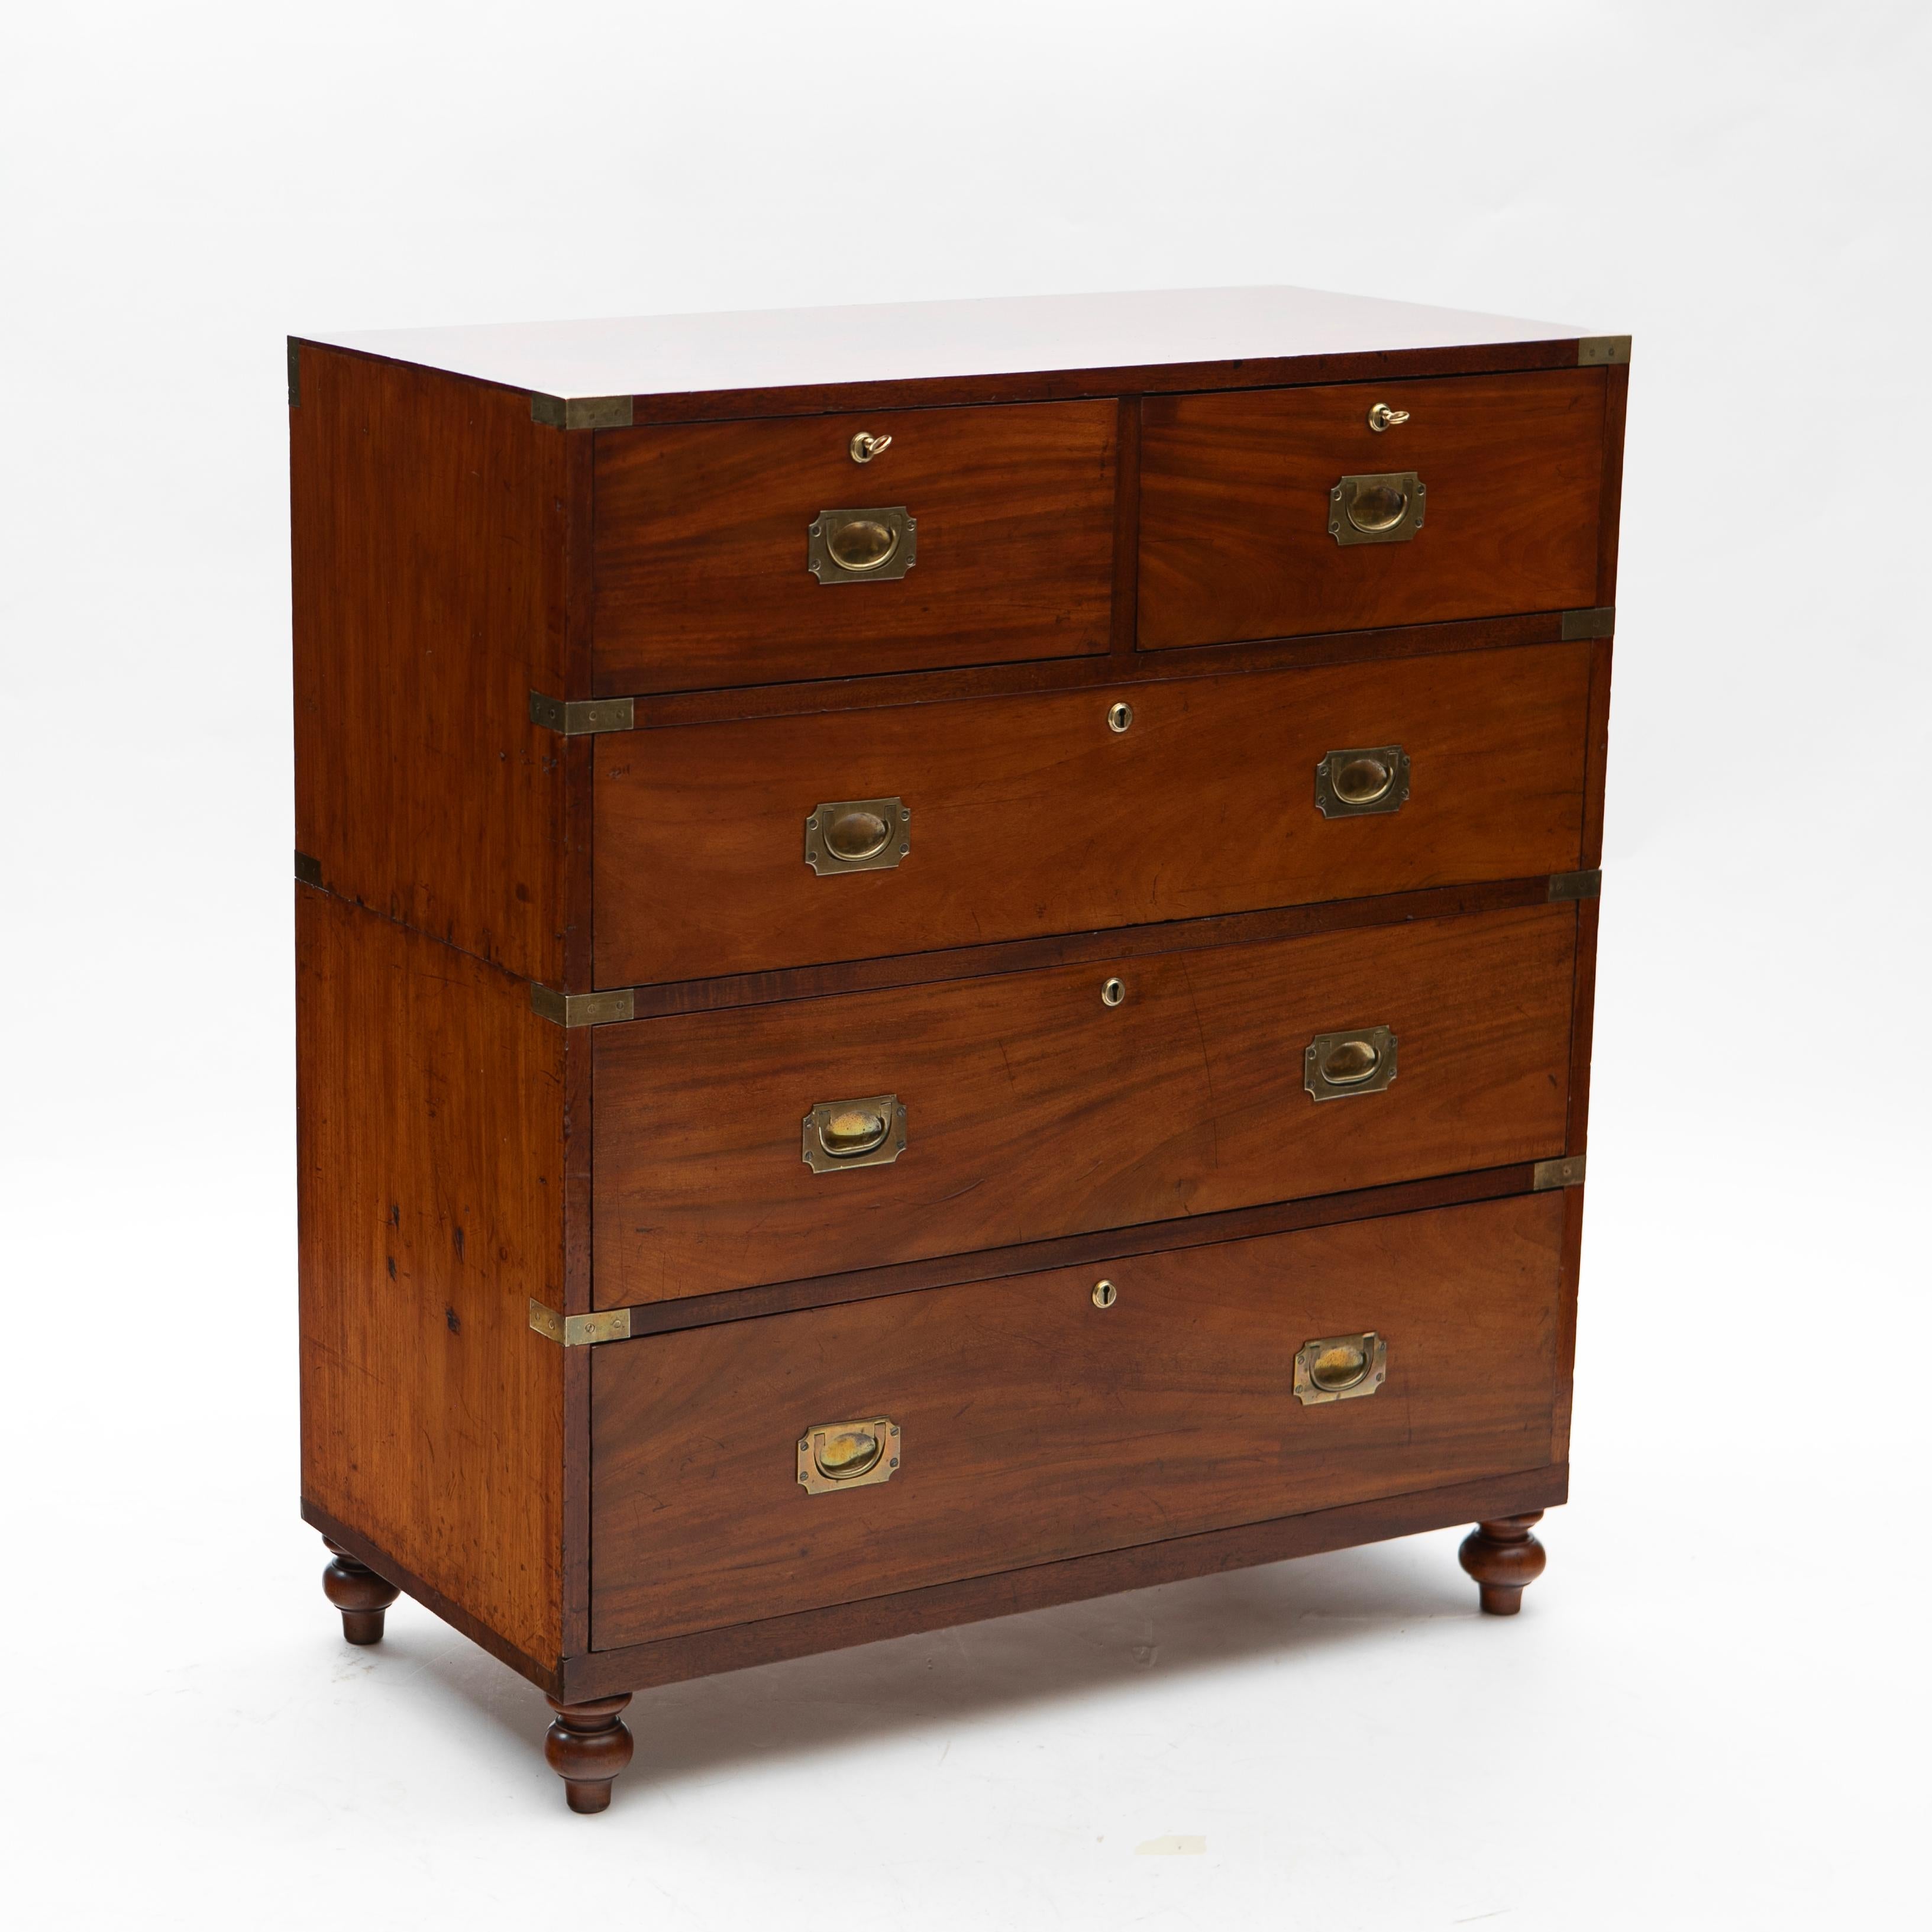 Military officer’s Campaign chest of five drawers by Ross & Co of Dublin.
Crafted in 1860-1880 in solid mahogany with original brass fittings and drawer locks by Hobbs & Co.
Gently repolished to preserve the beautiful patina.
England / Ireland